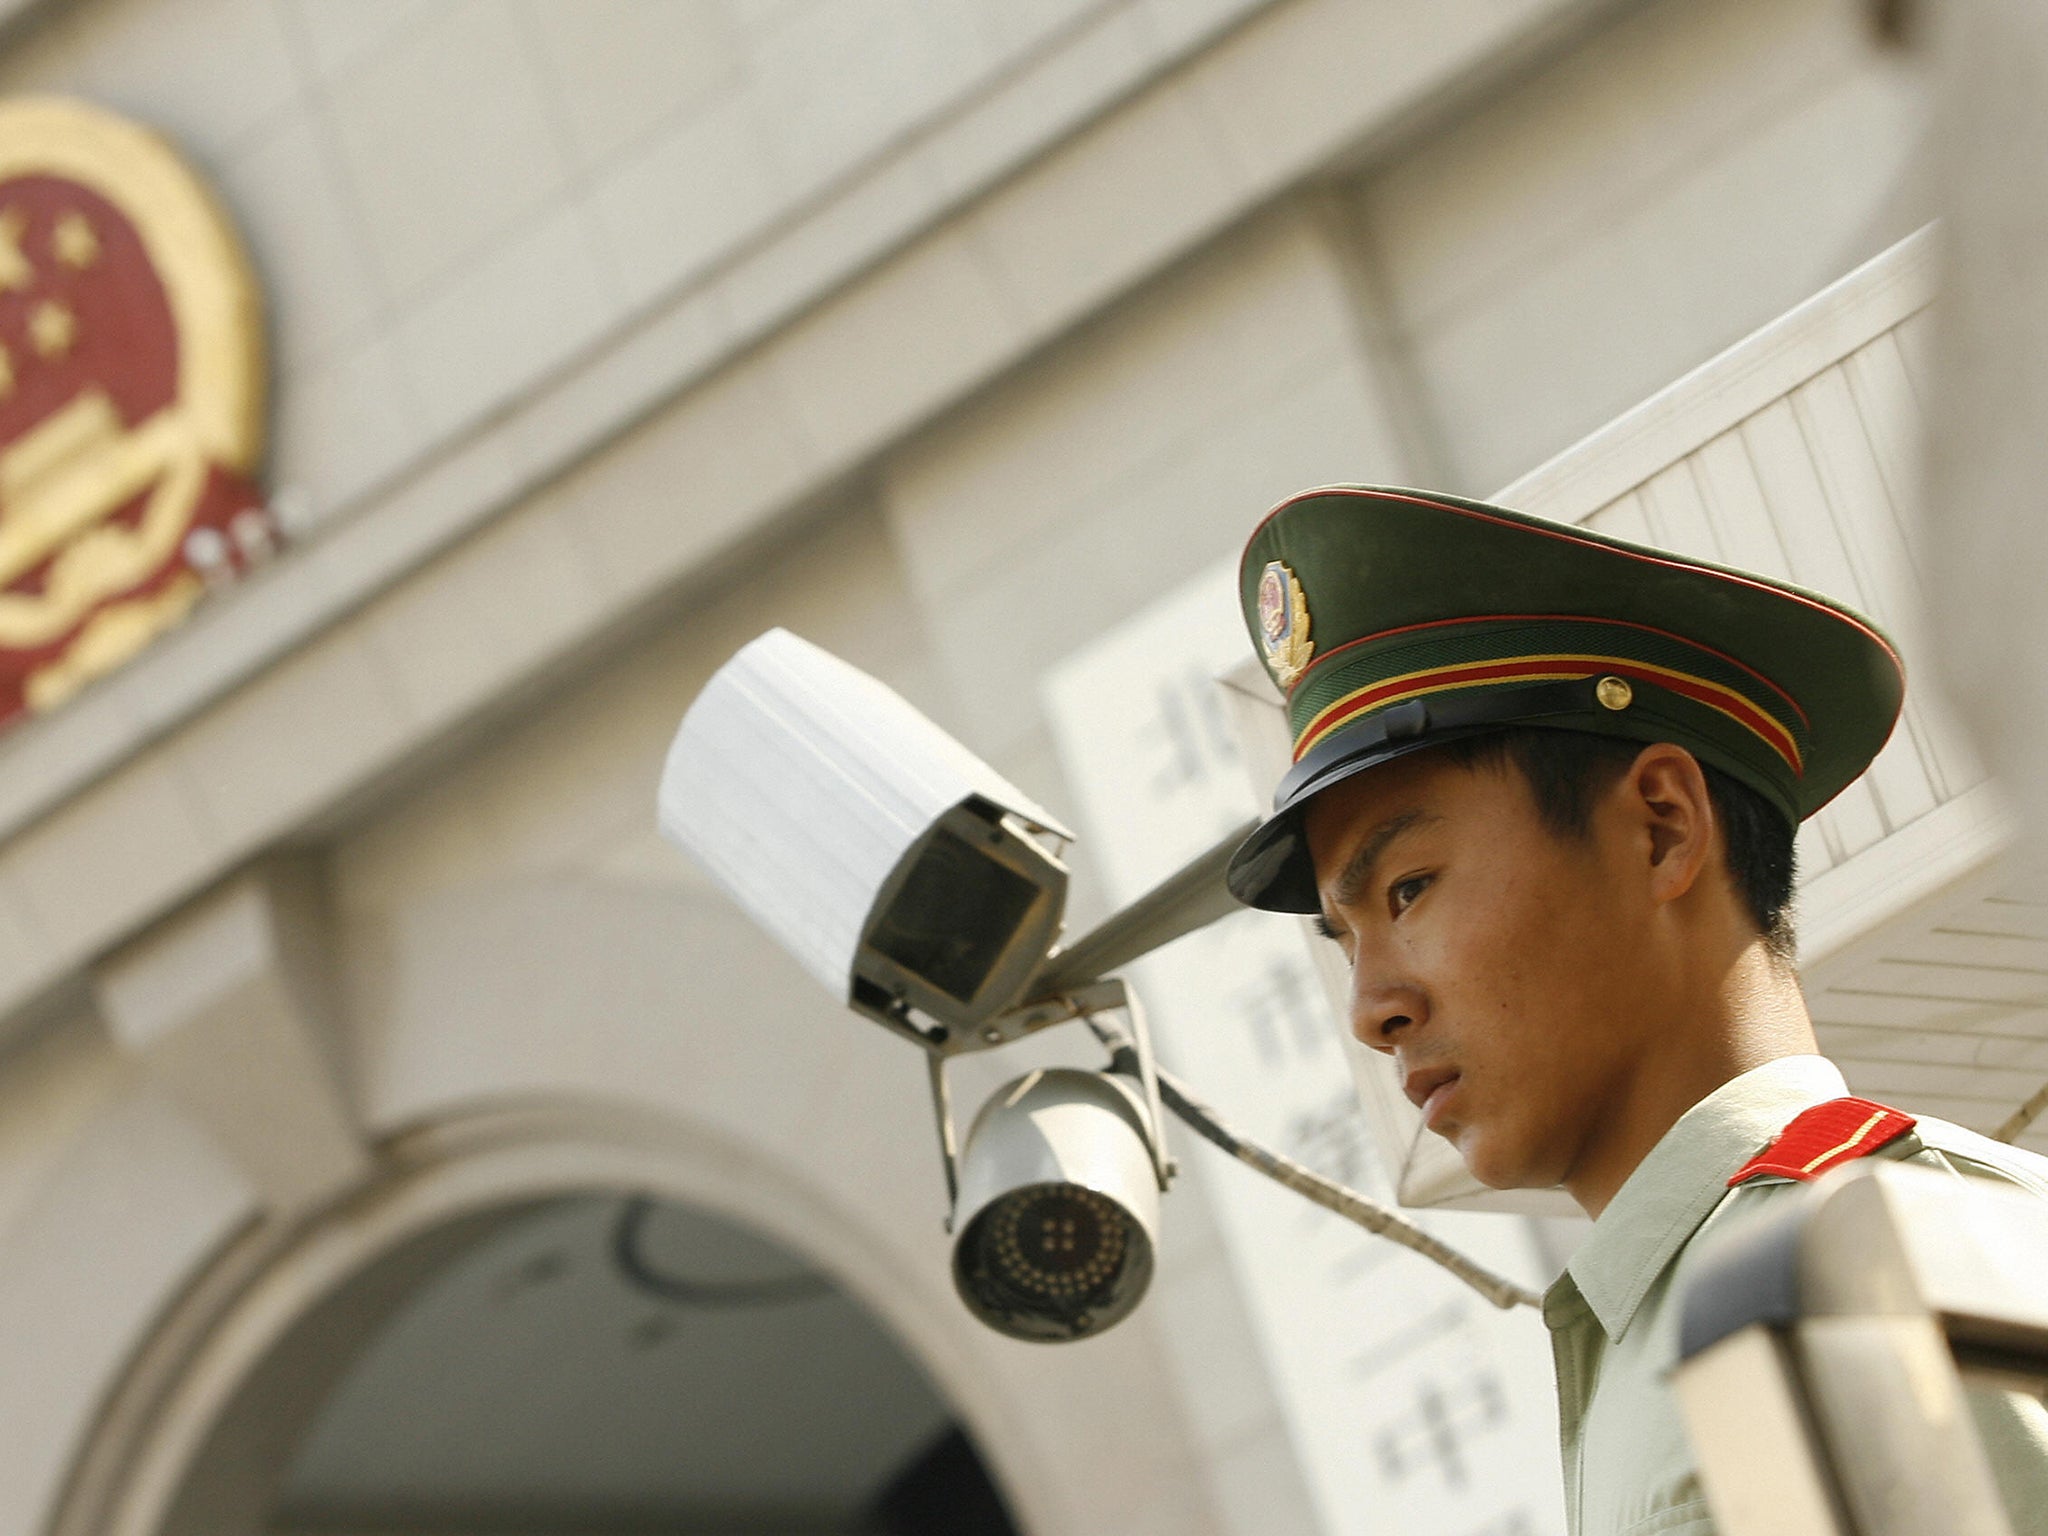 Chinese police made use of fears of unrest to win more power and resources